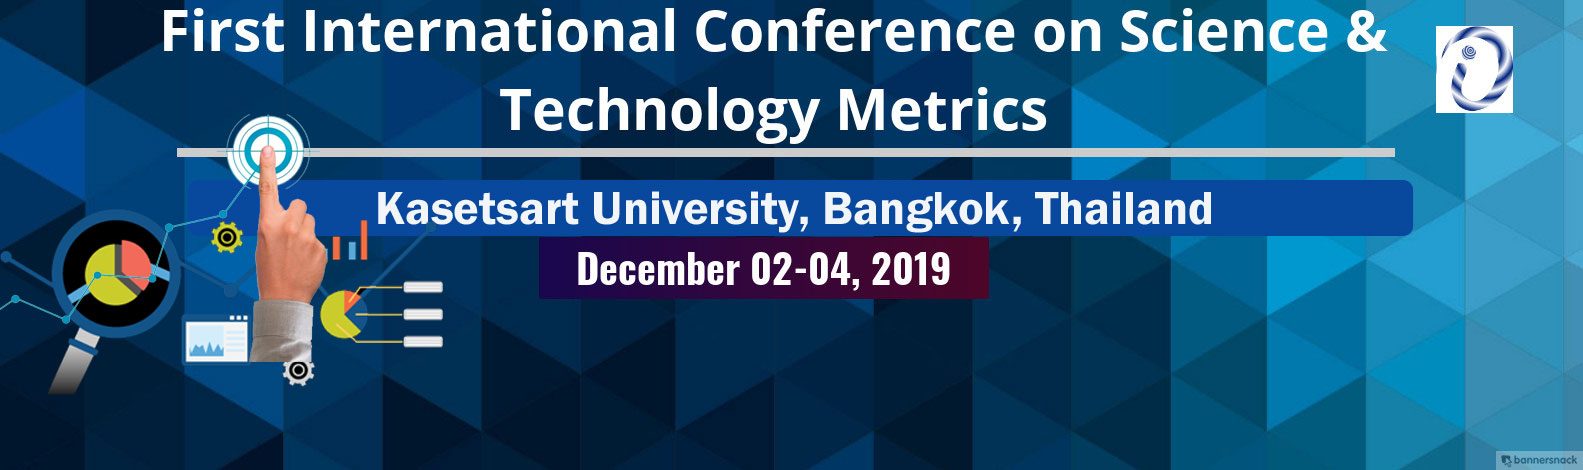 First International Conference on Science & Technology Metrics